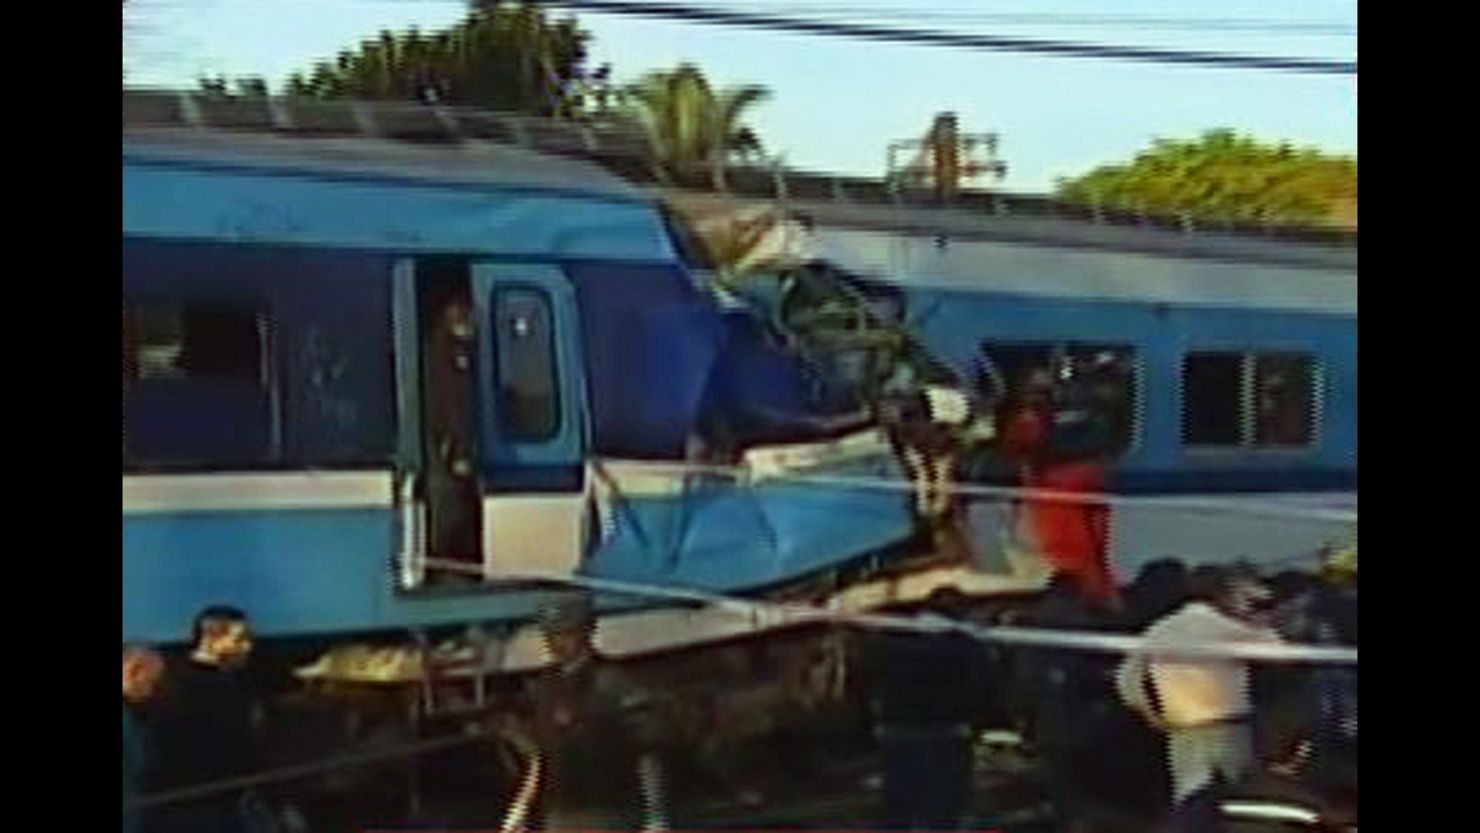 Two commuter trains collided in western suburb of Buenos Aires. CNN affiliate Canal 9 aired footage of the aftermath.